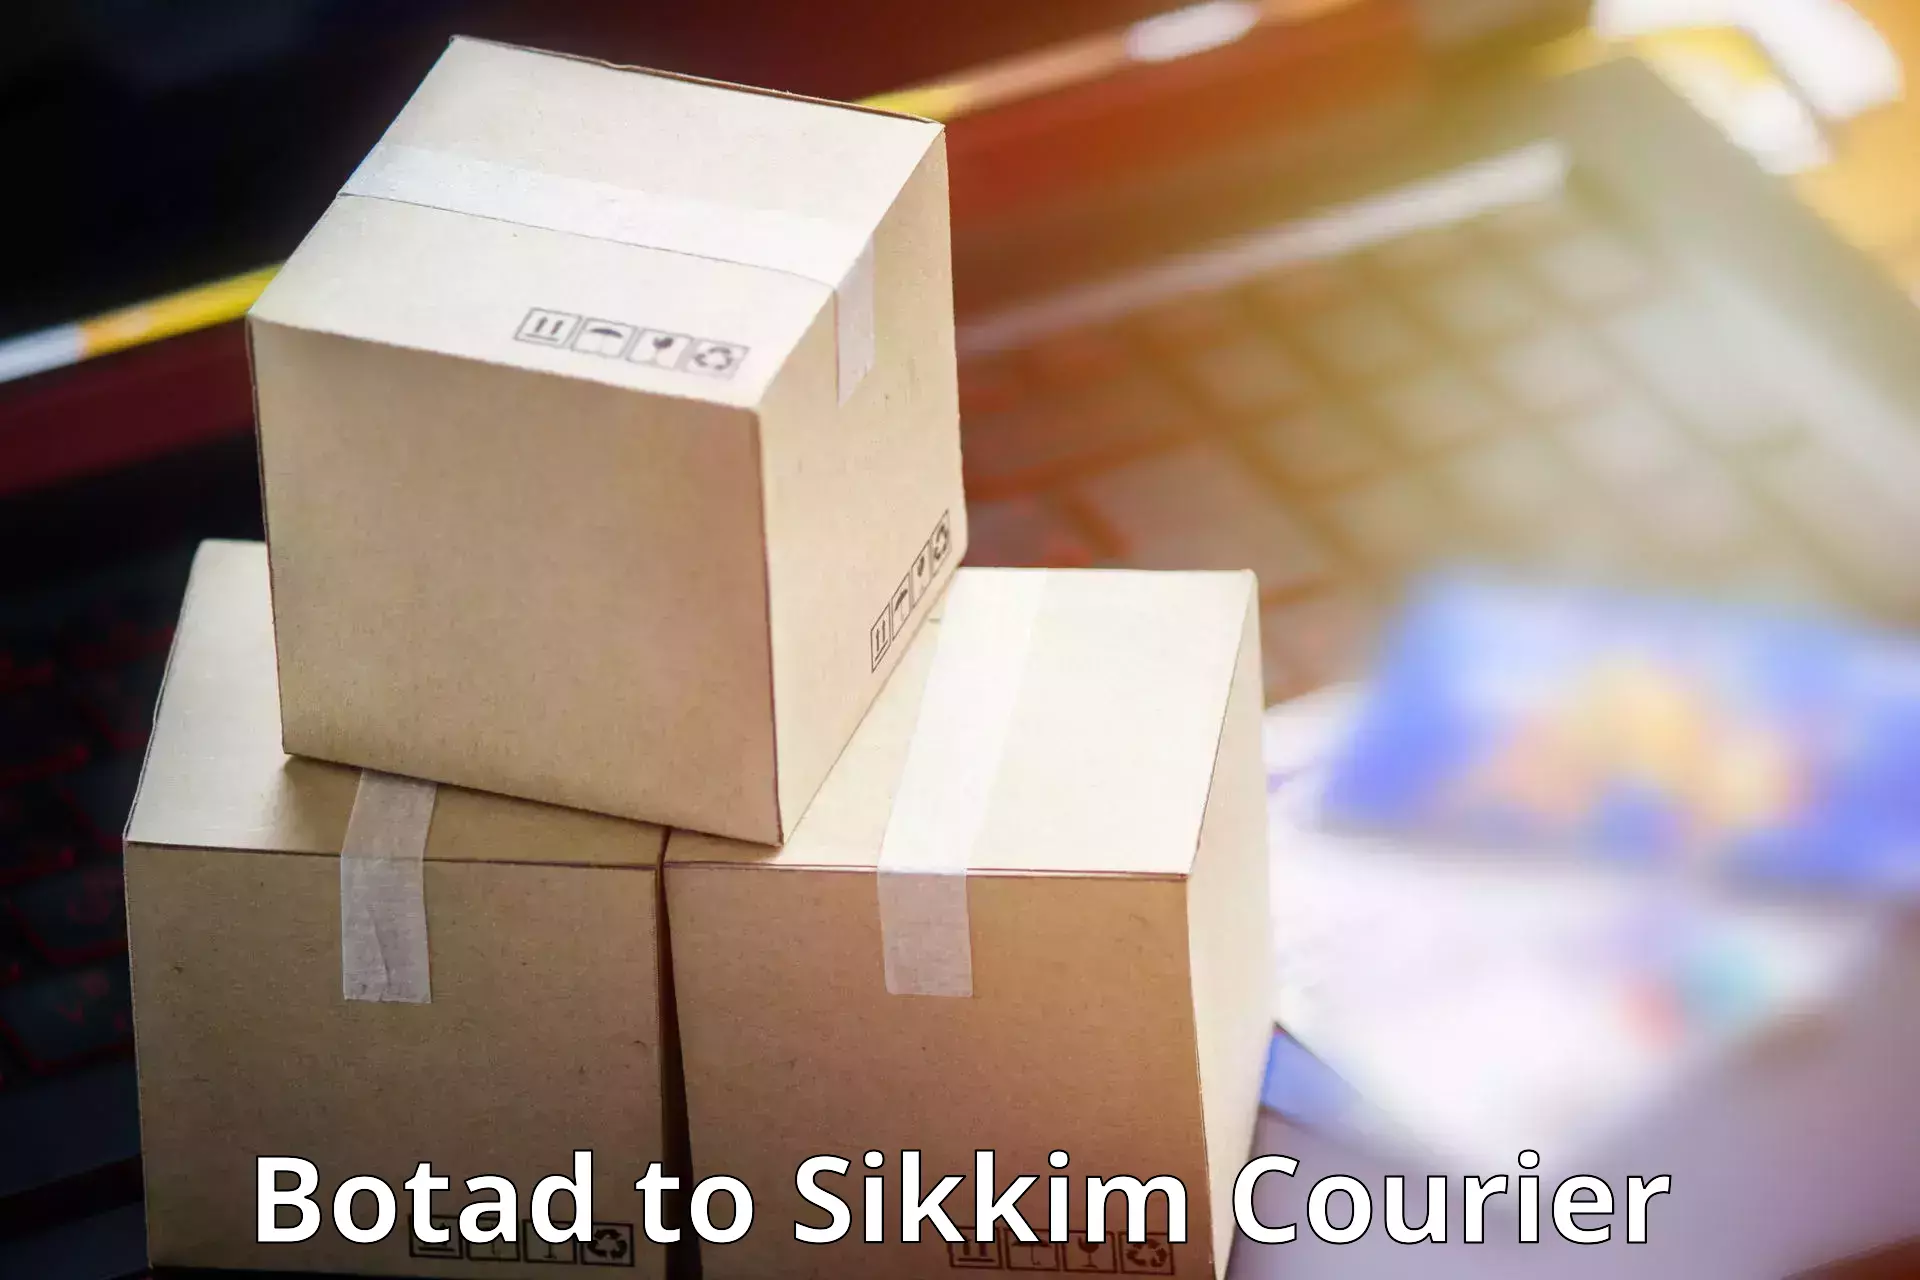 Comprehensive shipping network Botad to North Sikkim